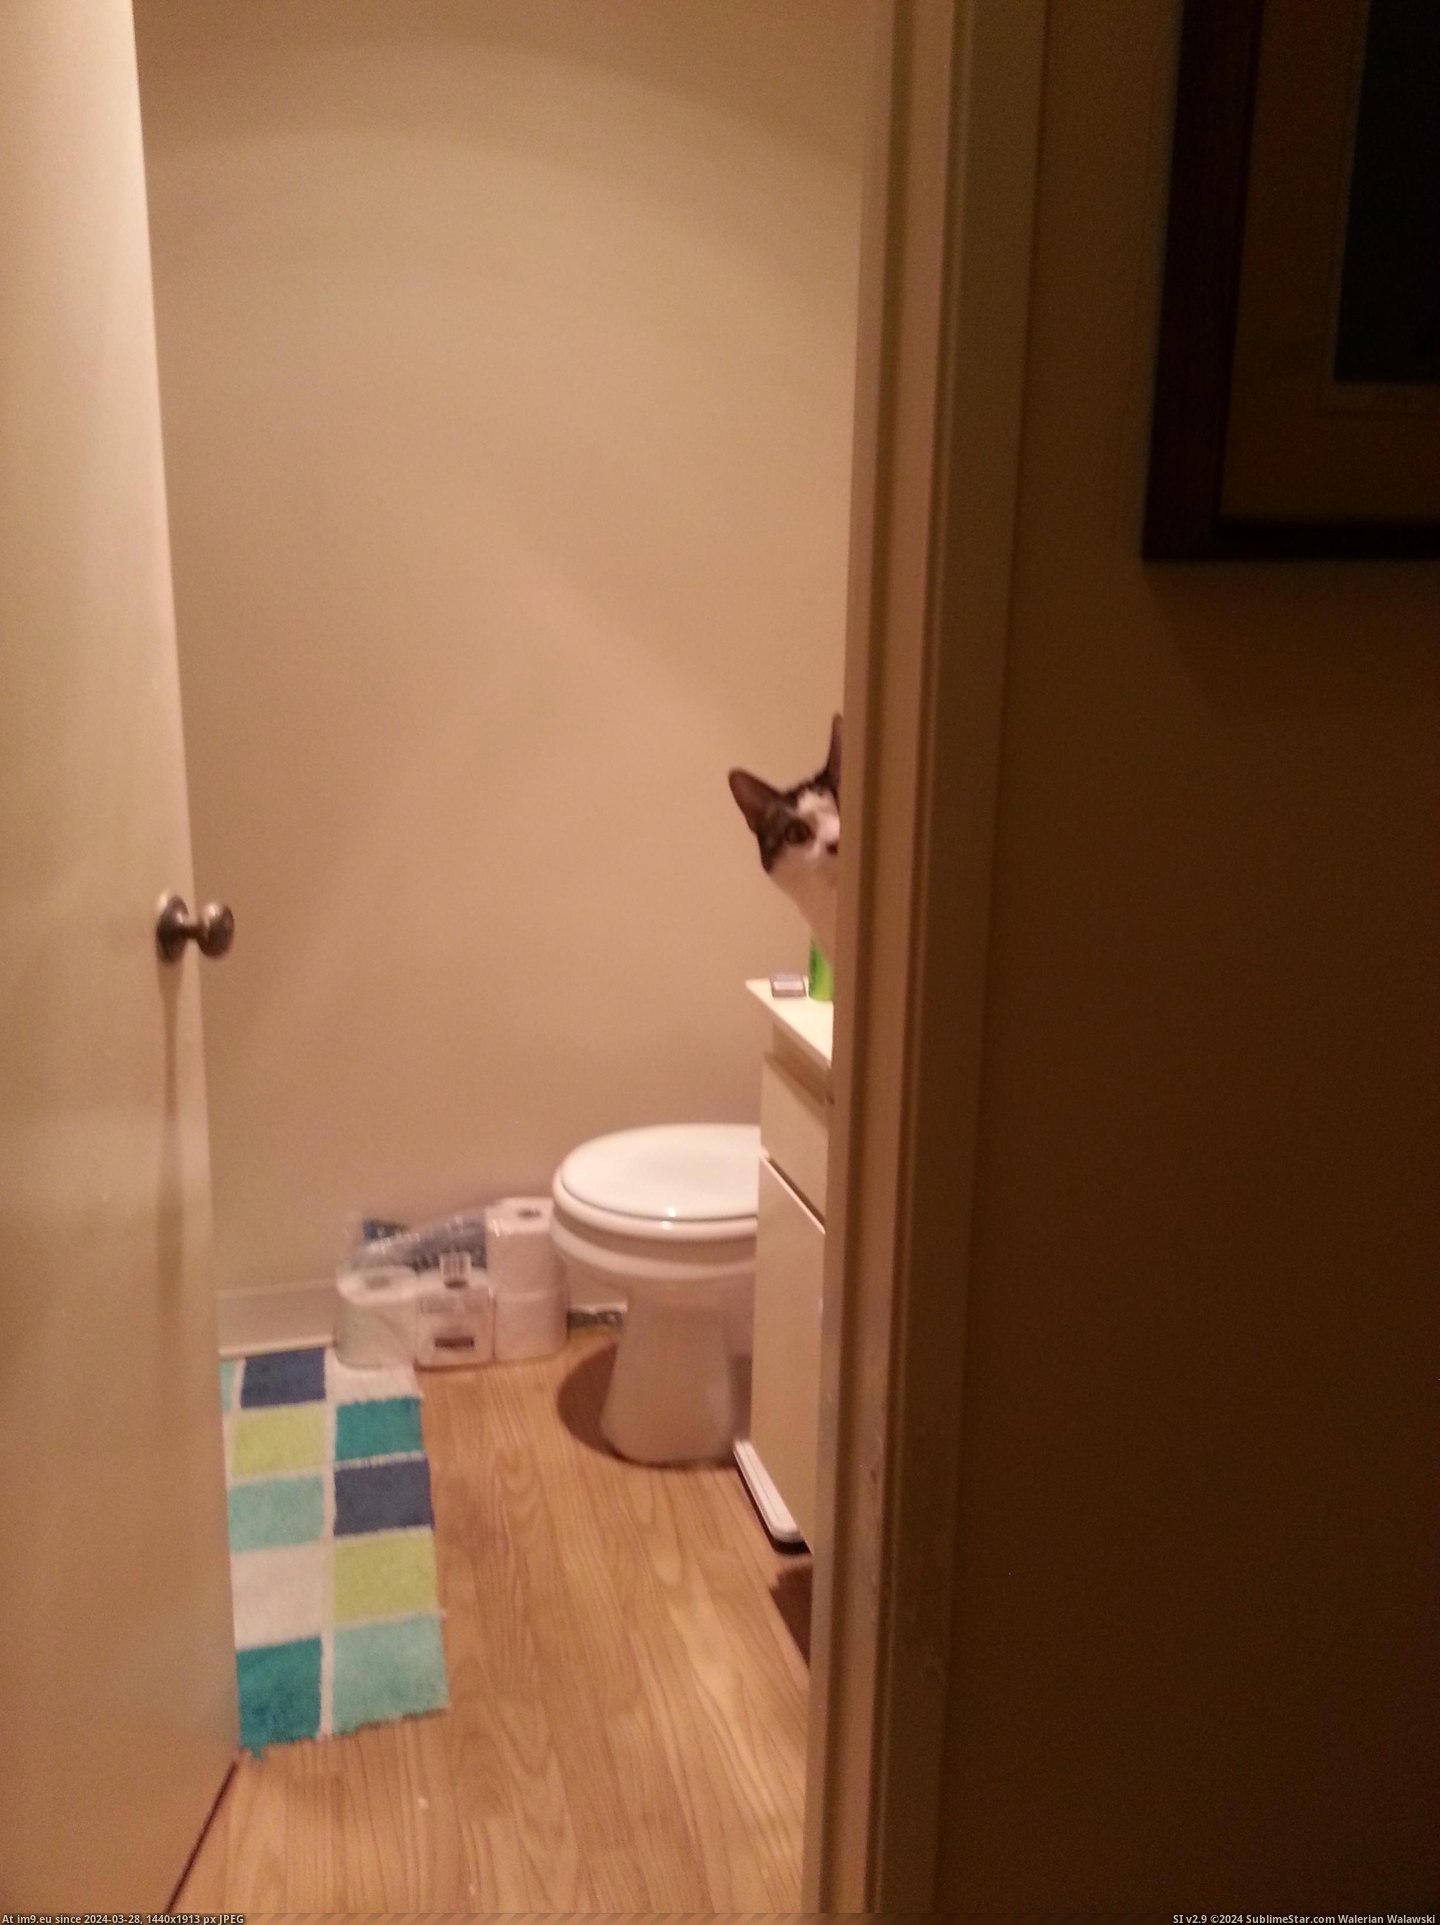 #Cats #For #Cat #Him #Run #Way #Water #Bathroom [Cats] This is my cat's way of asking me to run the water for him in the bathroom Pic. (Bild von album My r/CATS favs))